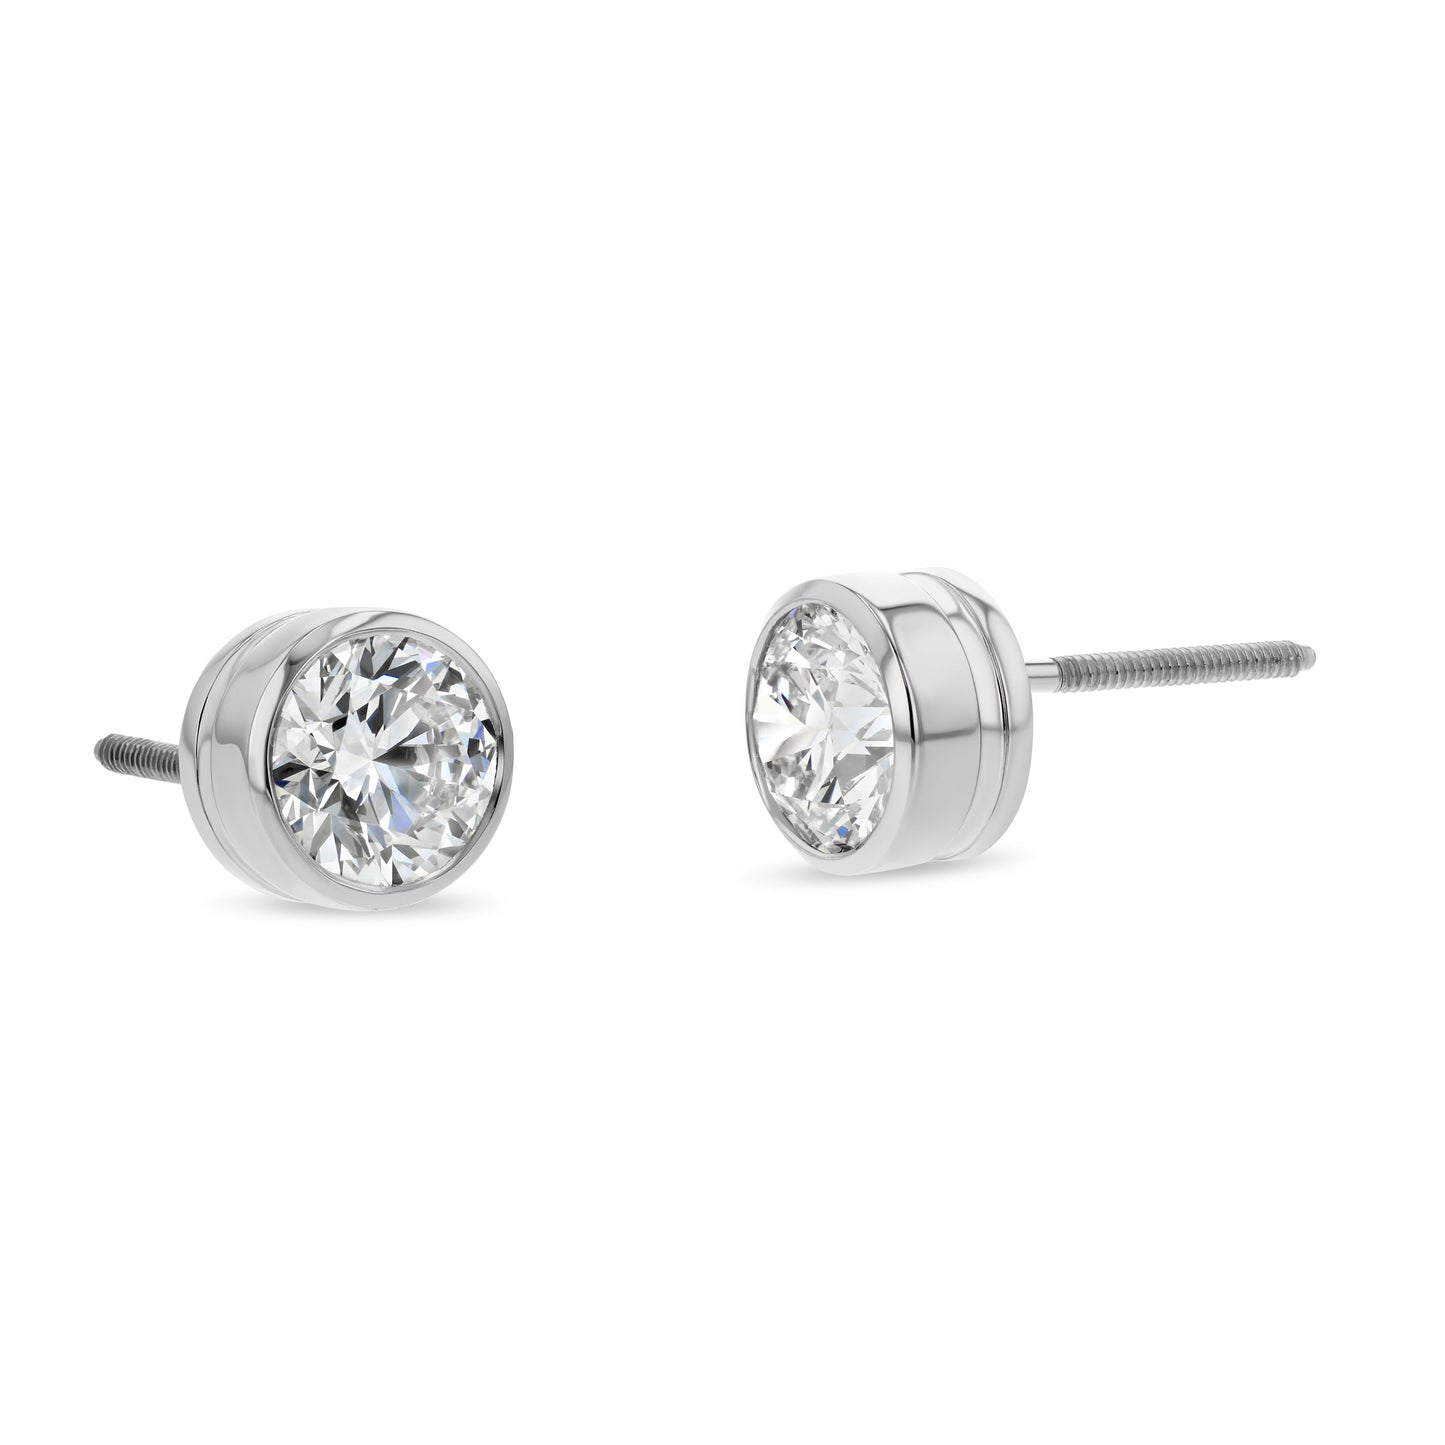 14k White Gold Bezel Round Diamond Stud Earrings 1/2ctw (4.1mm Ea), M-n Color, Si2-si3 Clarity